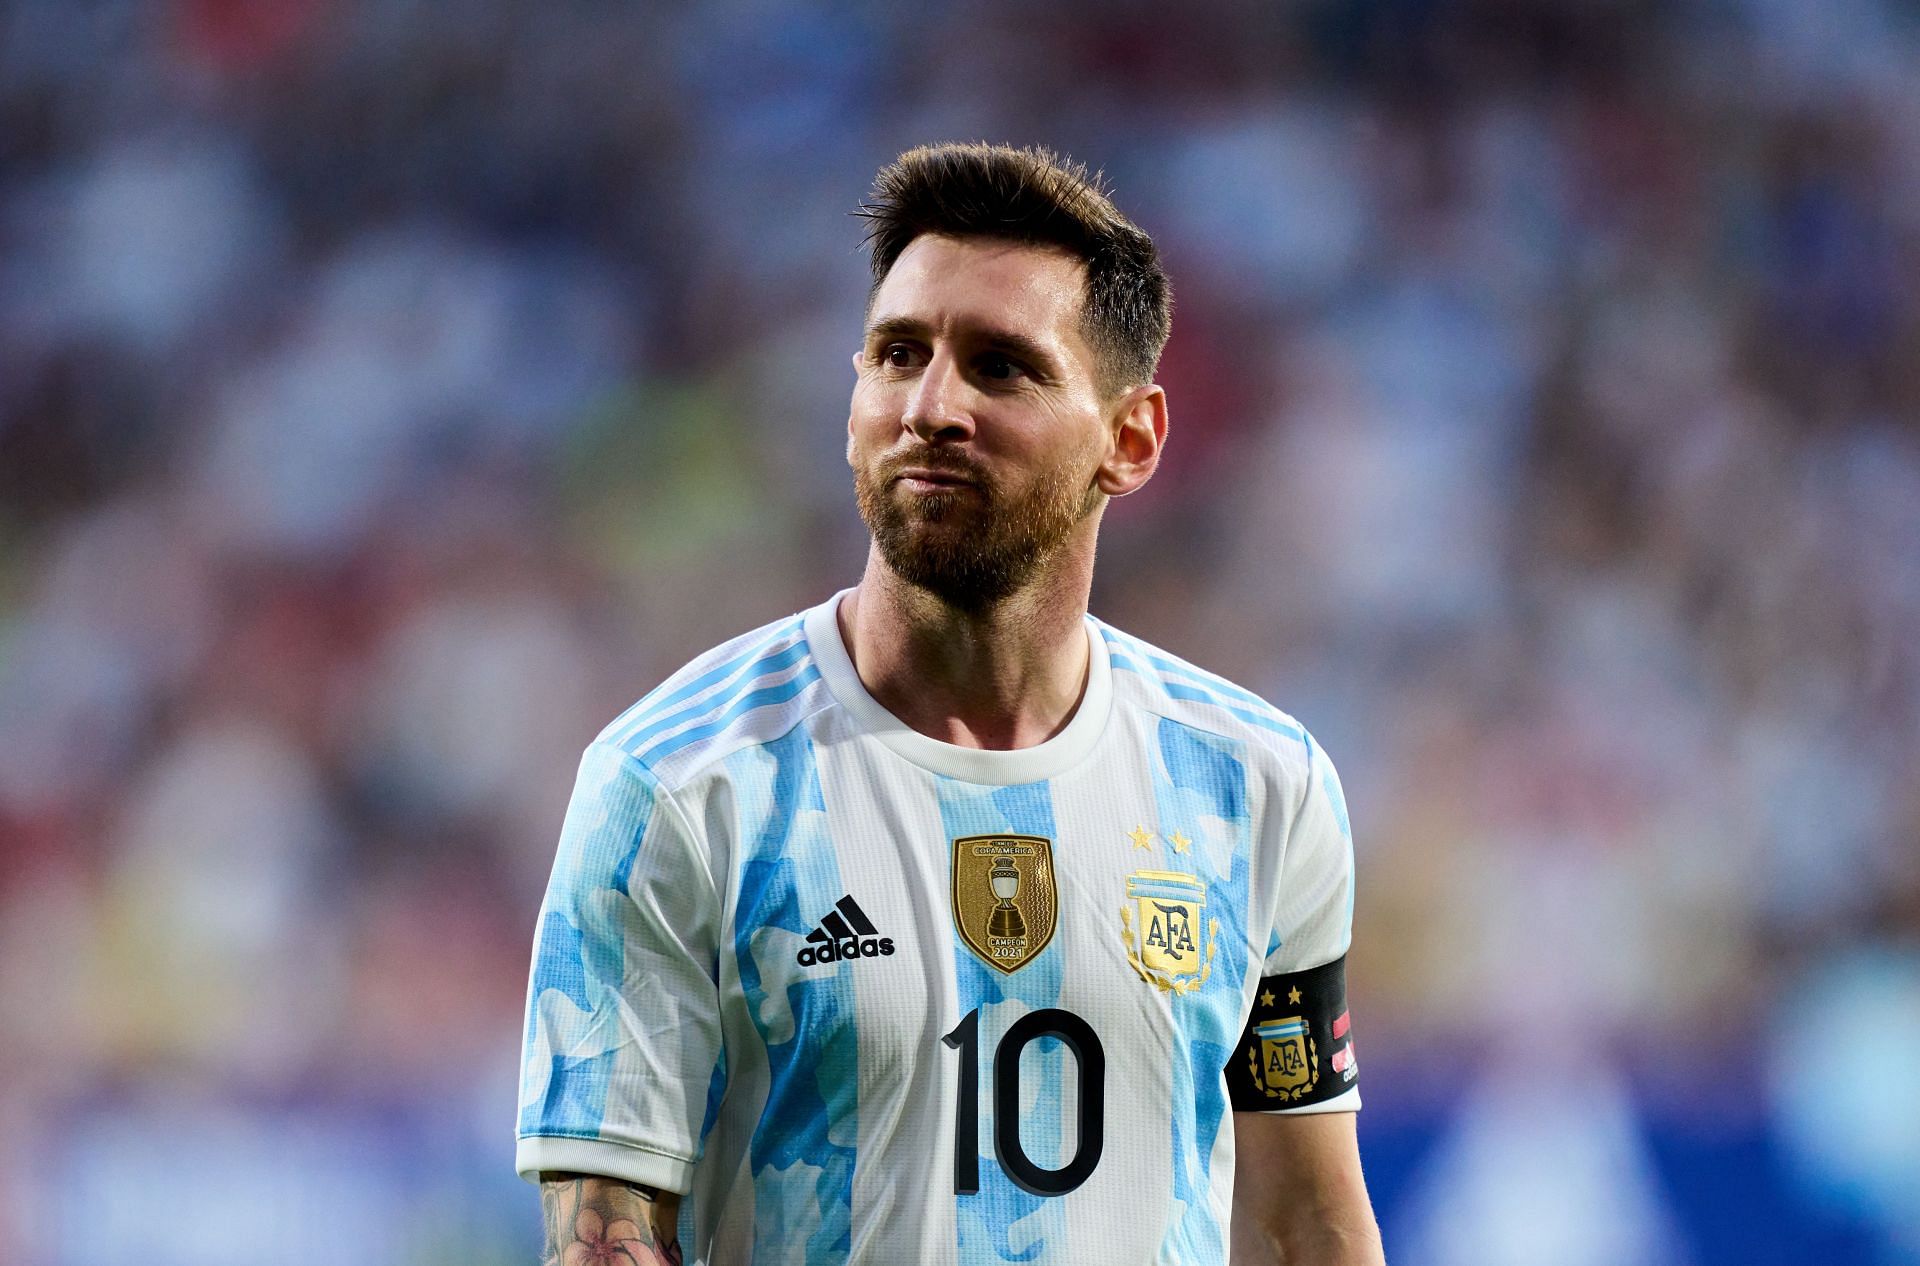 Lionel Messi is preparing to lay siege on the 2022 FIFA World Cup.